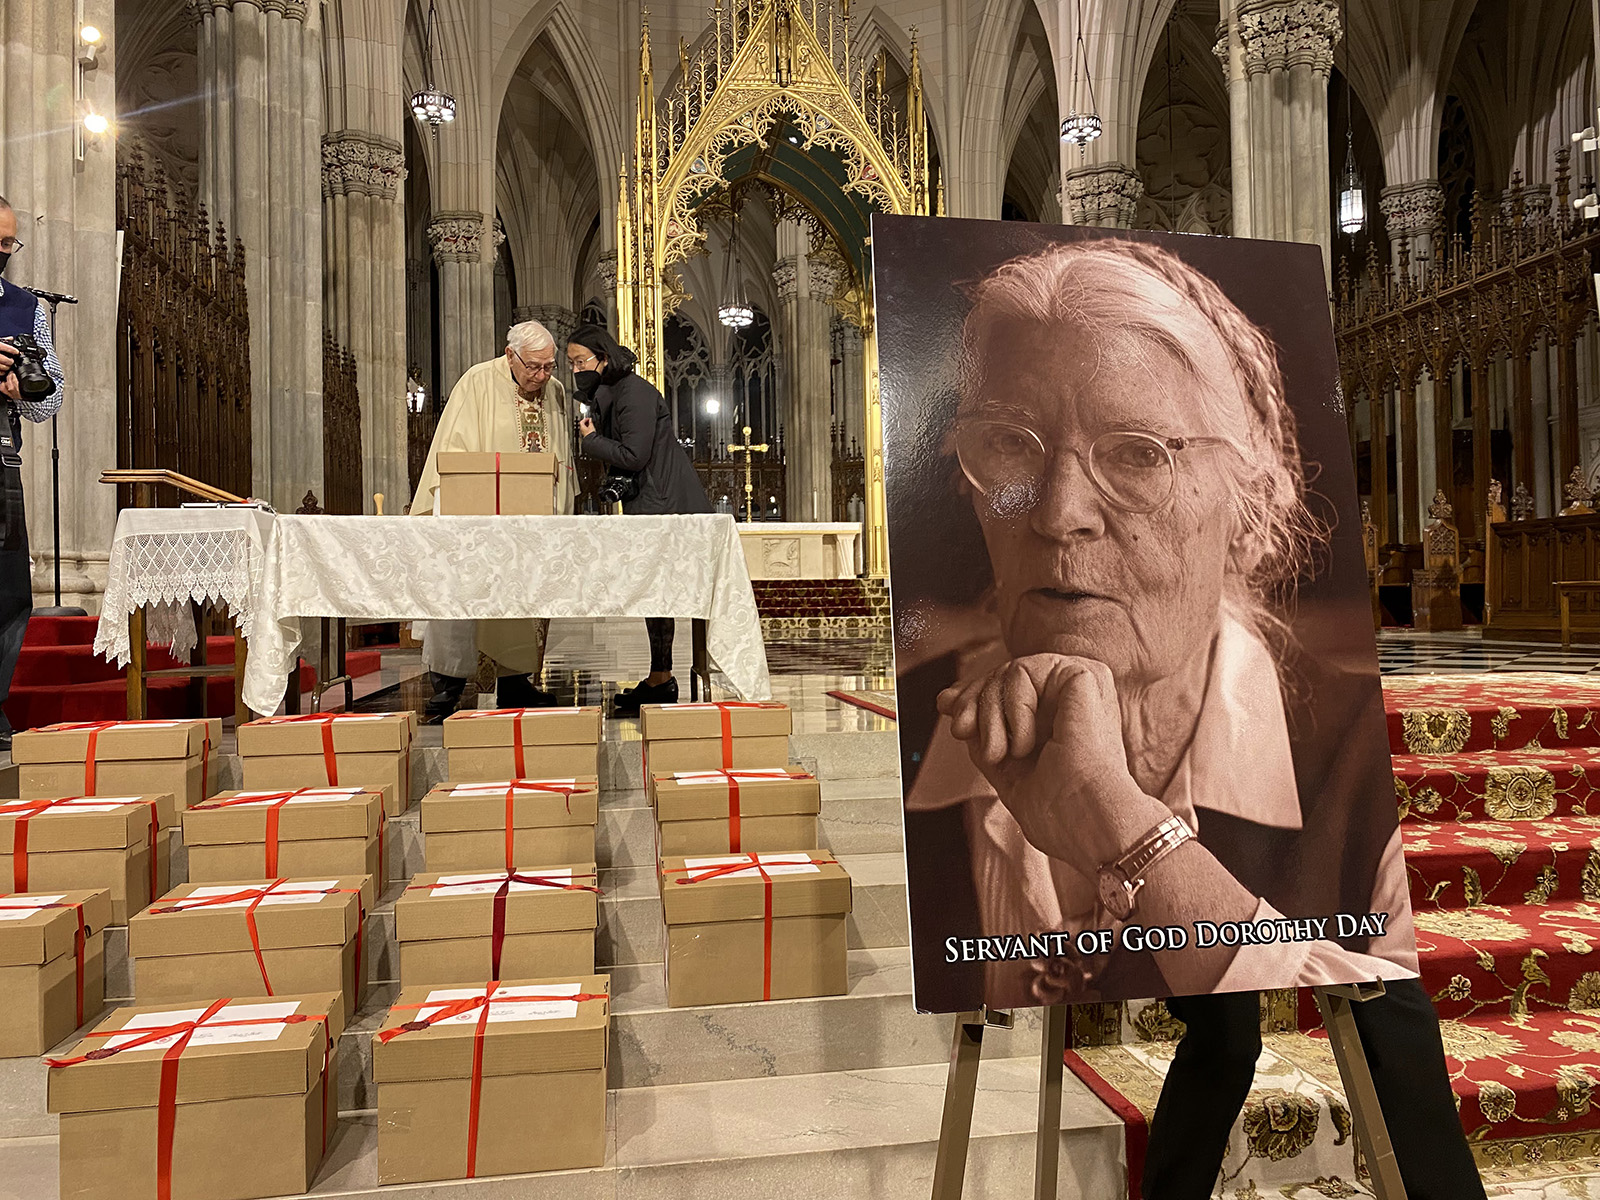 Cardboard boxes filled with evidence of Dorothy Day’s “reputation for holiness” sit after a Mass at St. Patrick's Cathedral in New York, Wednesday, Dec. 8, 2021. The boxes will be sent to the Congregation for the Causes of Saints in Rome. RNS photo by Renée Roden